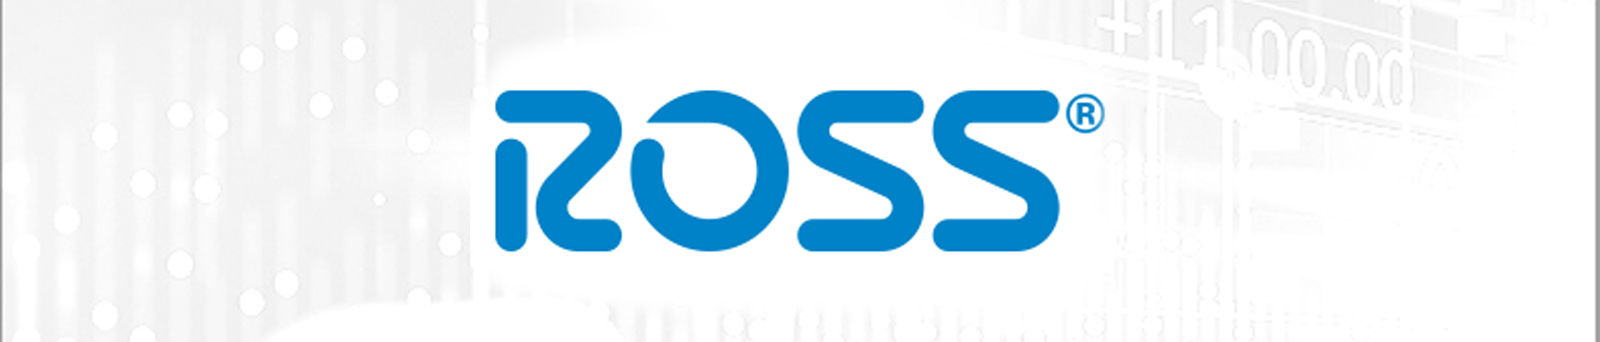 Ross Stores, Inc. (NasdaqGS: ROST) Company Profile